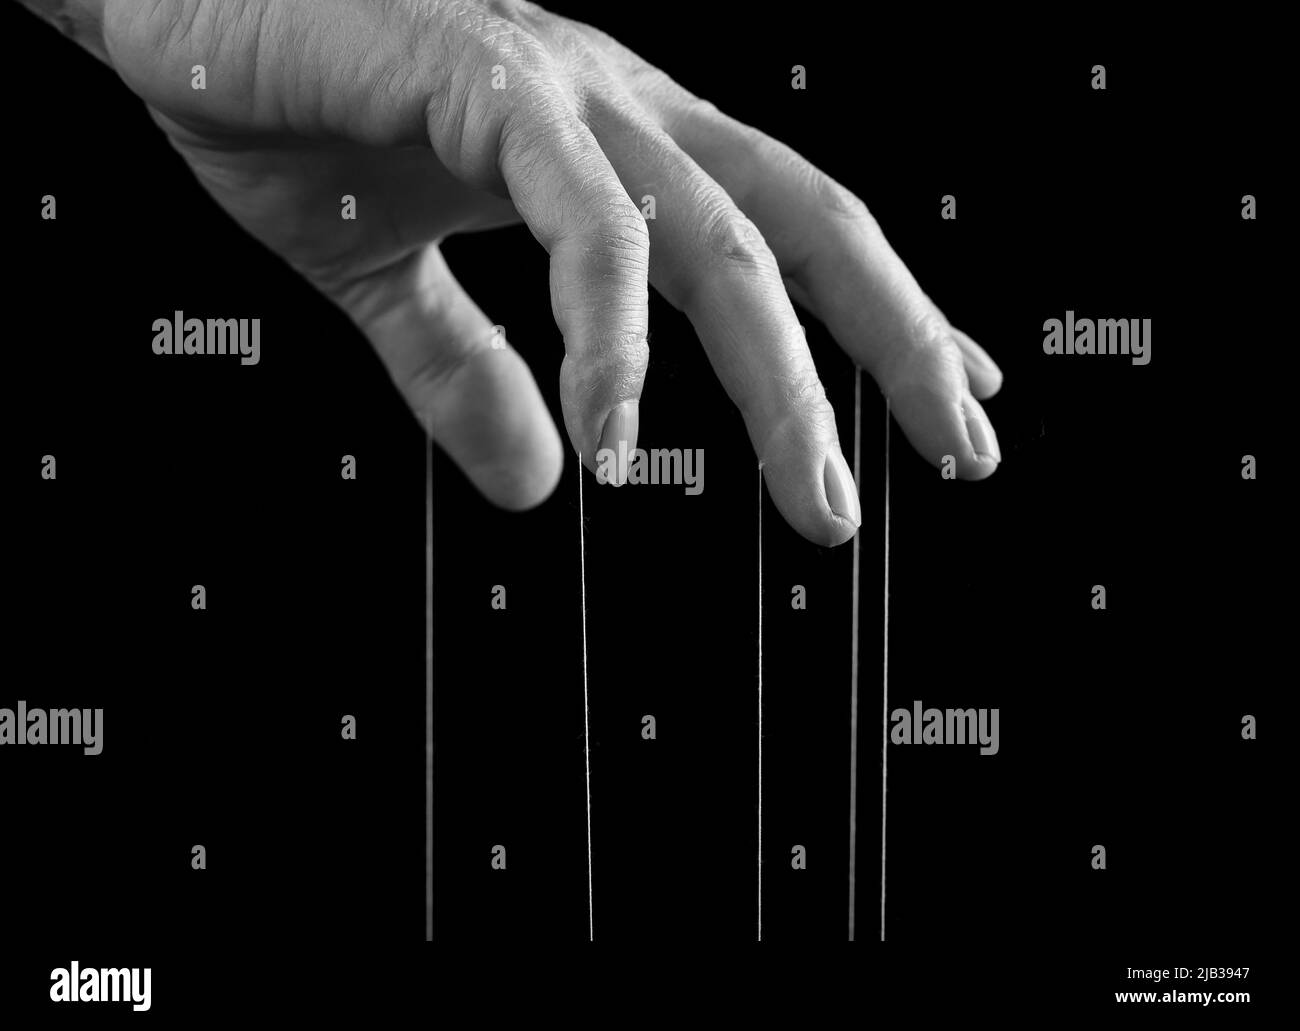 Influence, manipulation concept. Man hand with strings on fingers. Male suffering from drug, gambling, internet addiction or physical, emotional stress. Black and white. High quality photo Stock Photo